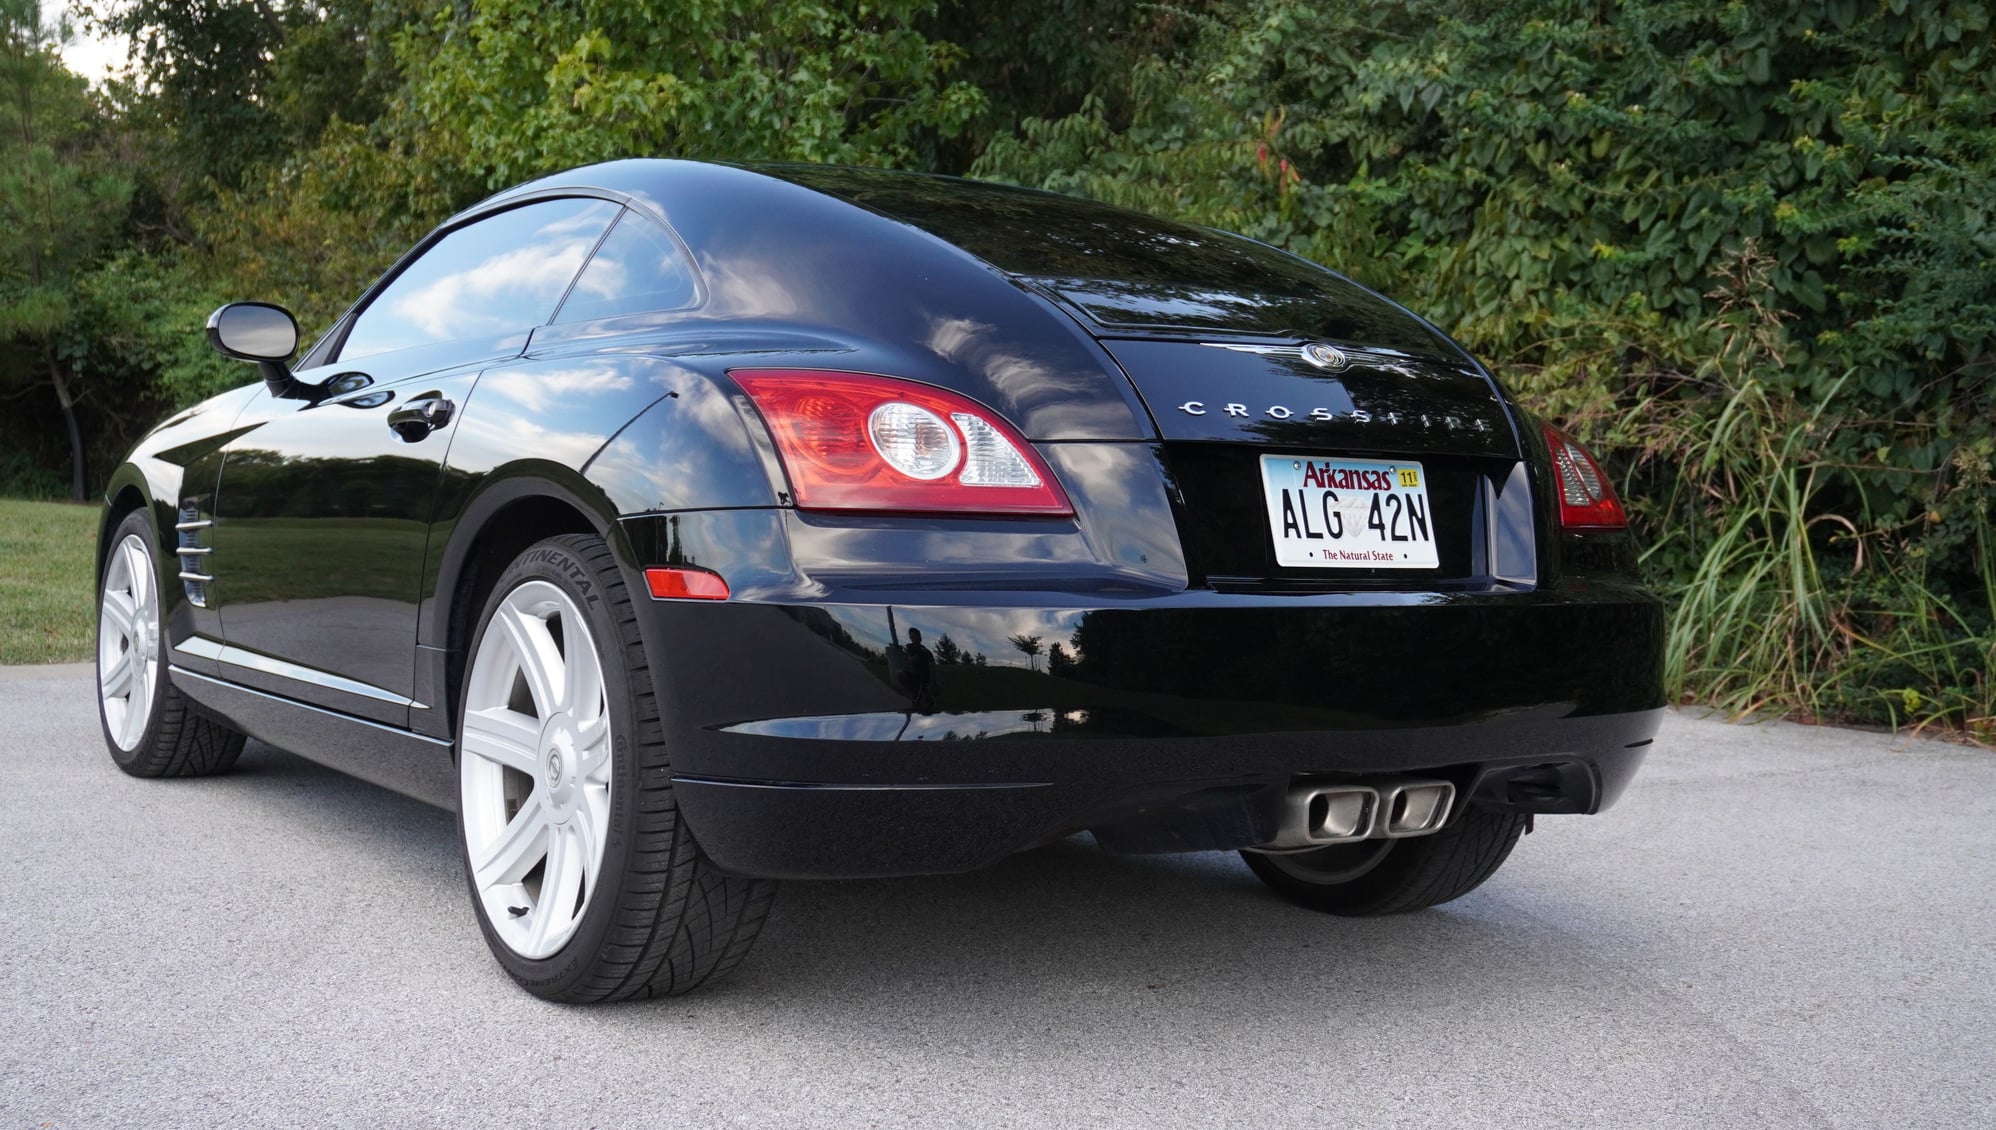 2007 Chrysler Crossfire - 2007 Crossfire Coupe 6 Speed Manual - Used - VIN 1C3LN59L87X073454 - 34,500 Miles - 6 cyl - 2WD - Manual - Coupe - Black - Bentonville, AR 72712, United States